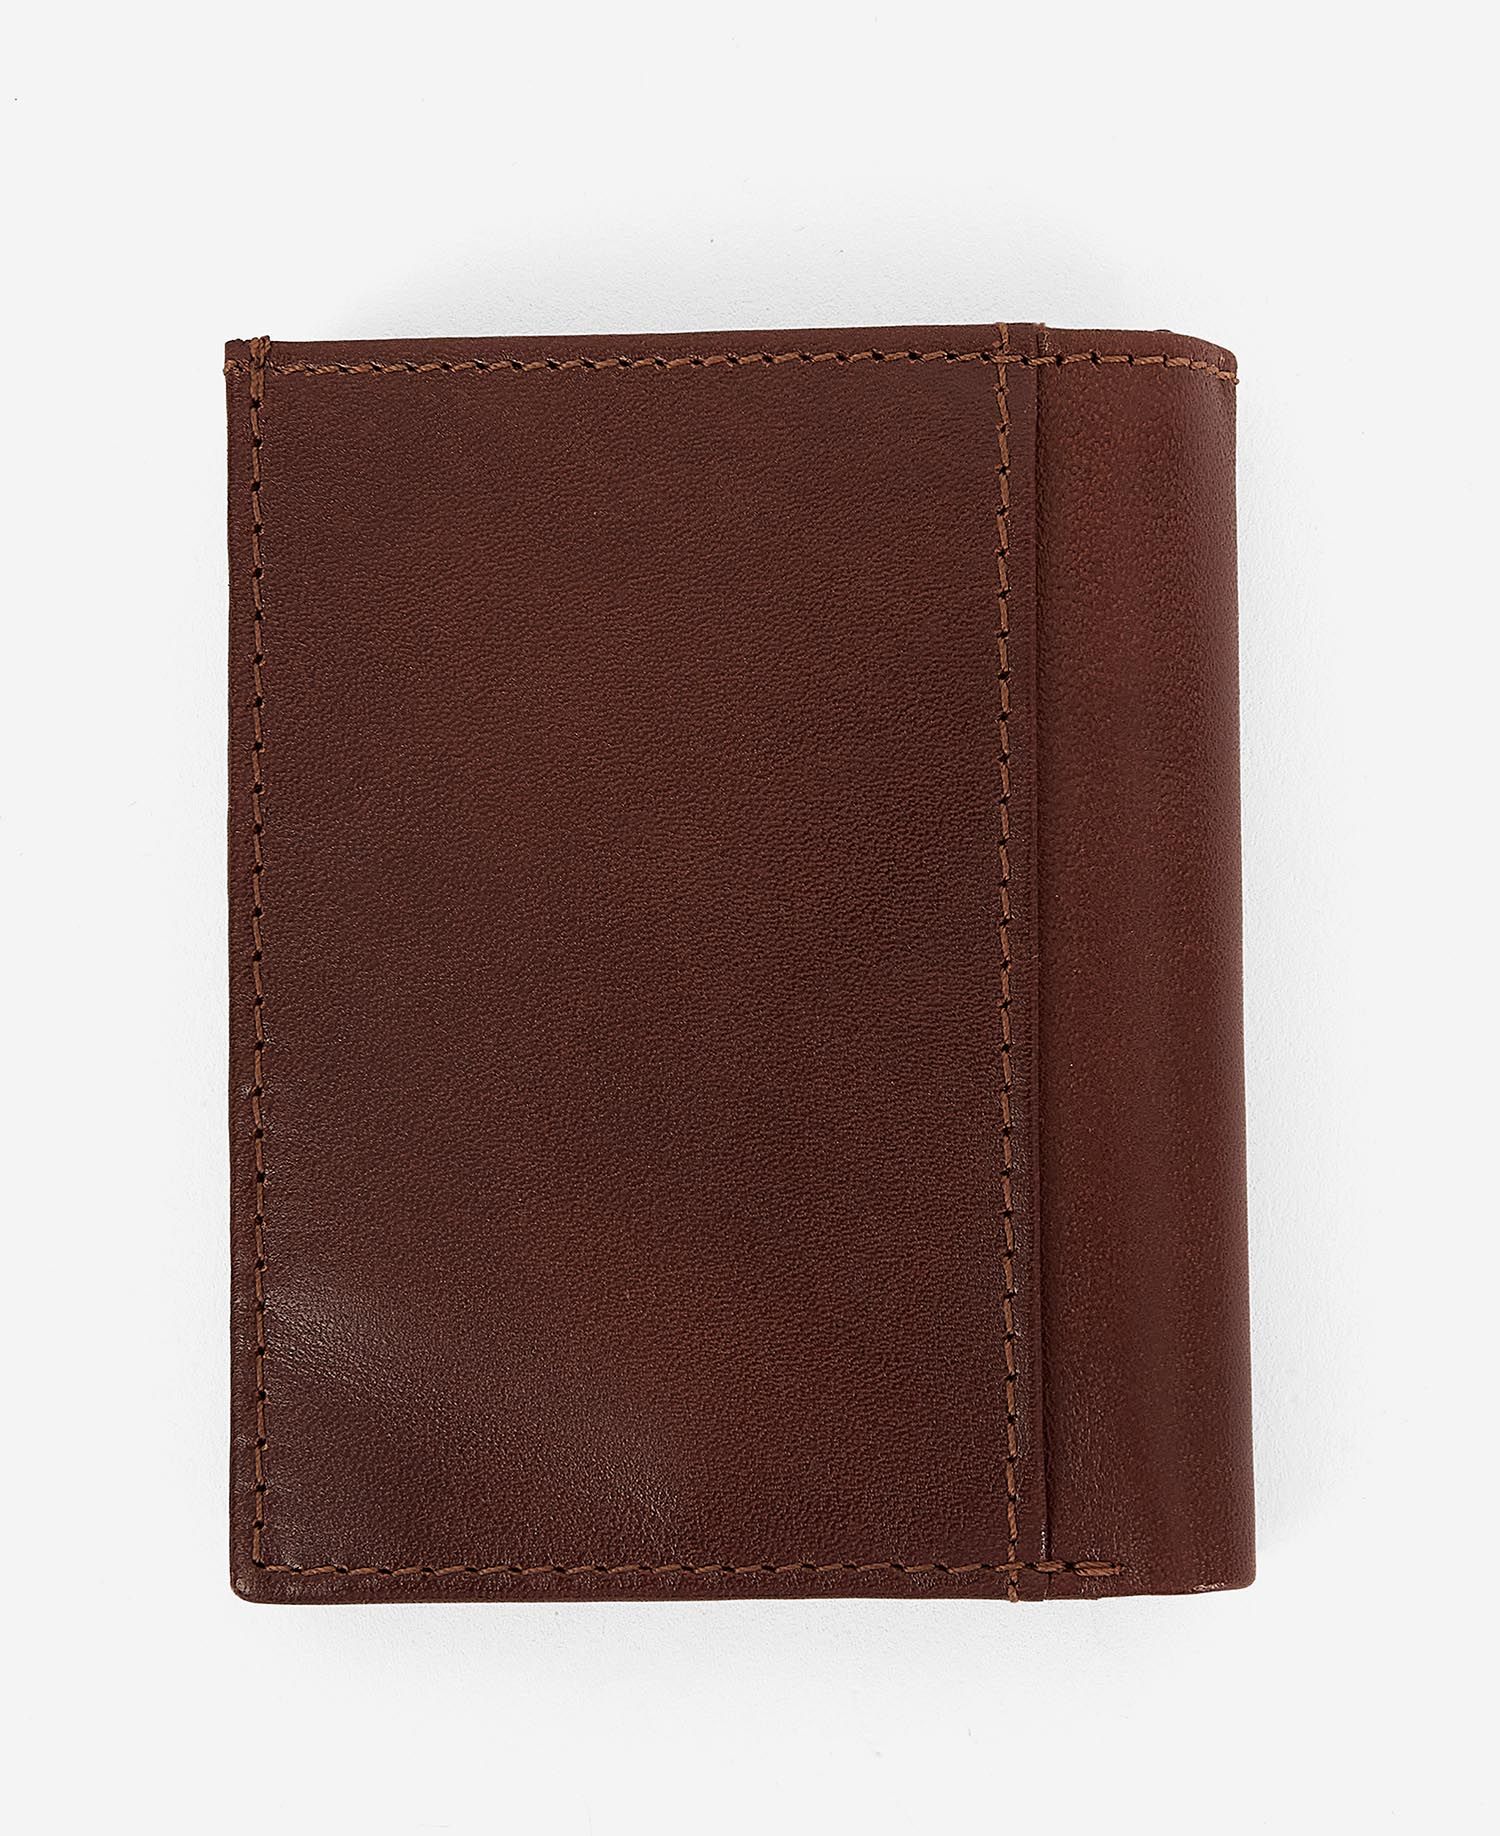 Shop the Barbour Colwell Small Billfold Wallet in Brown today. | Barbour